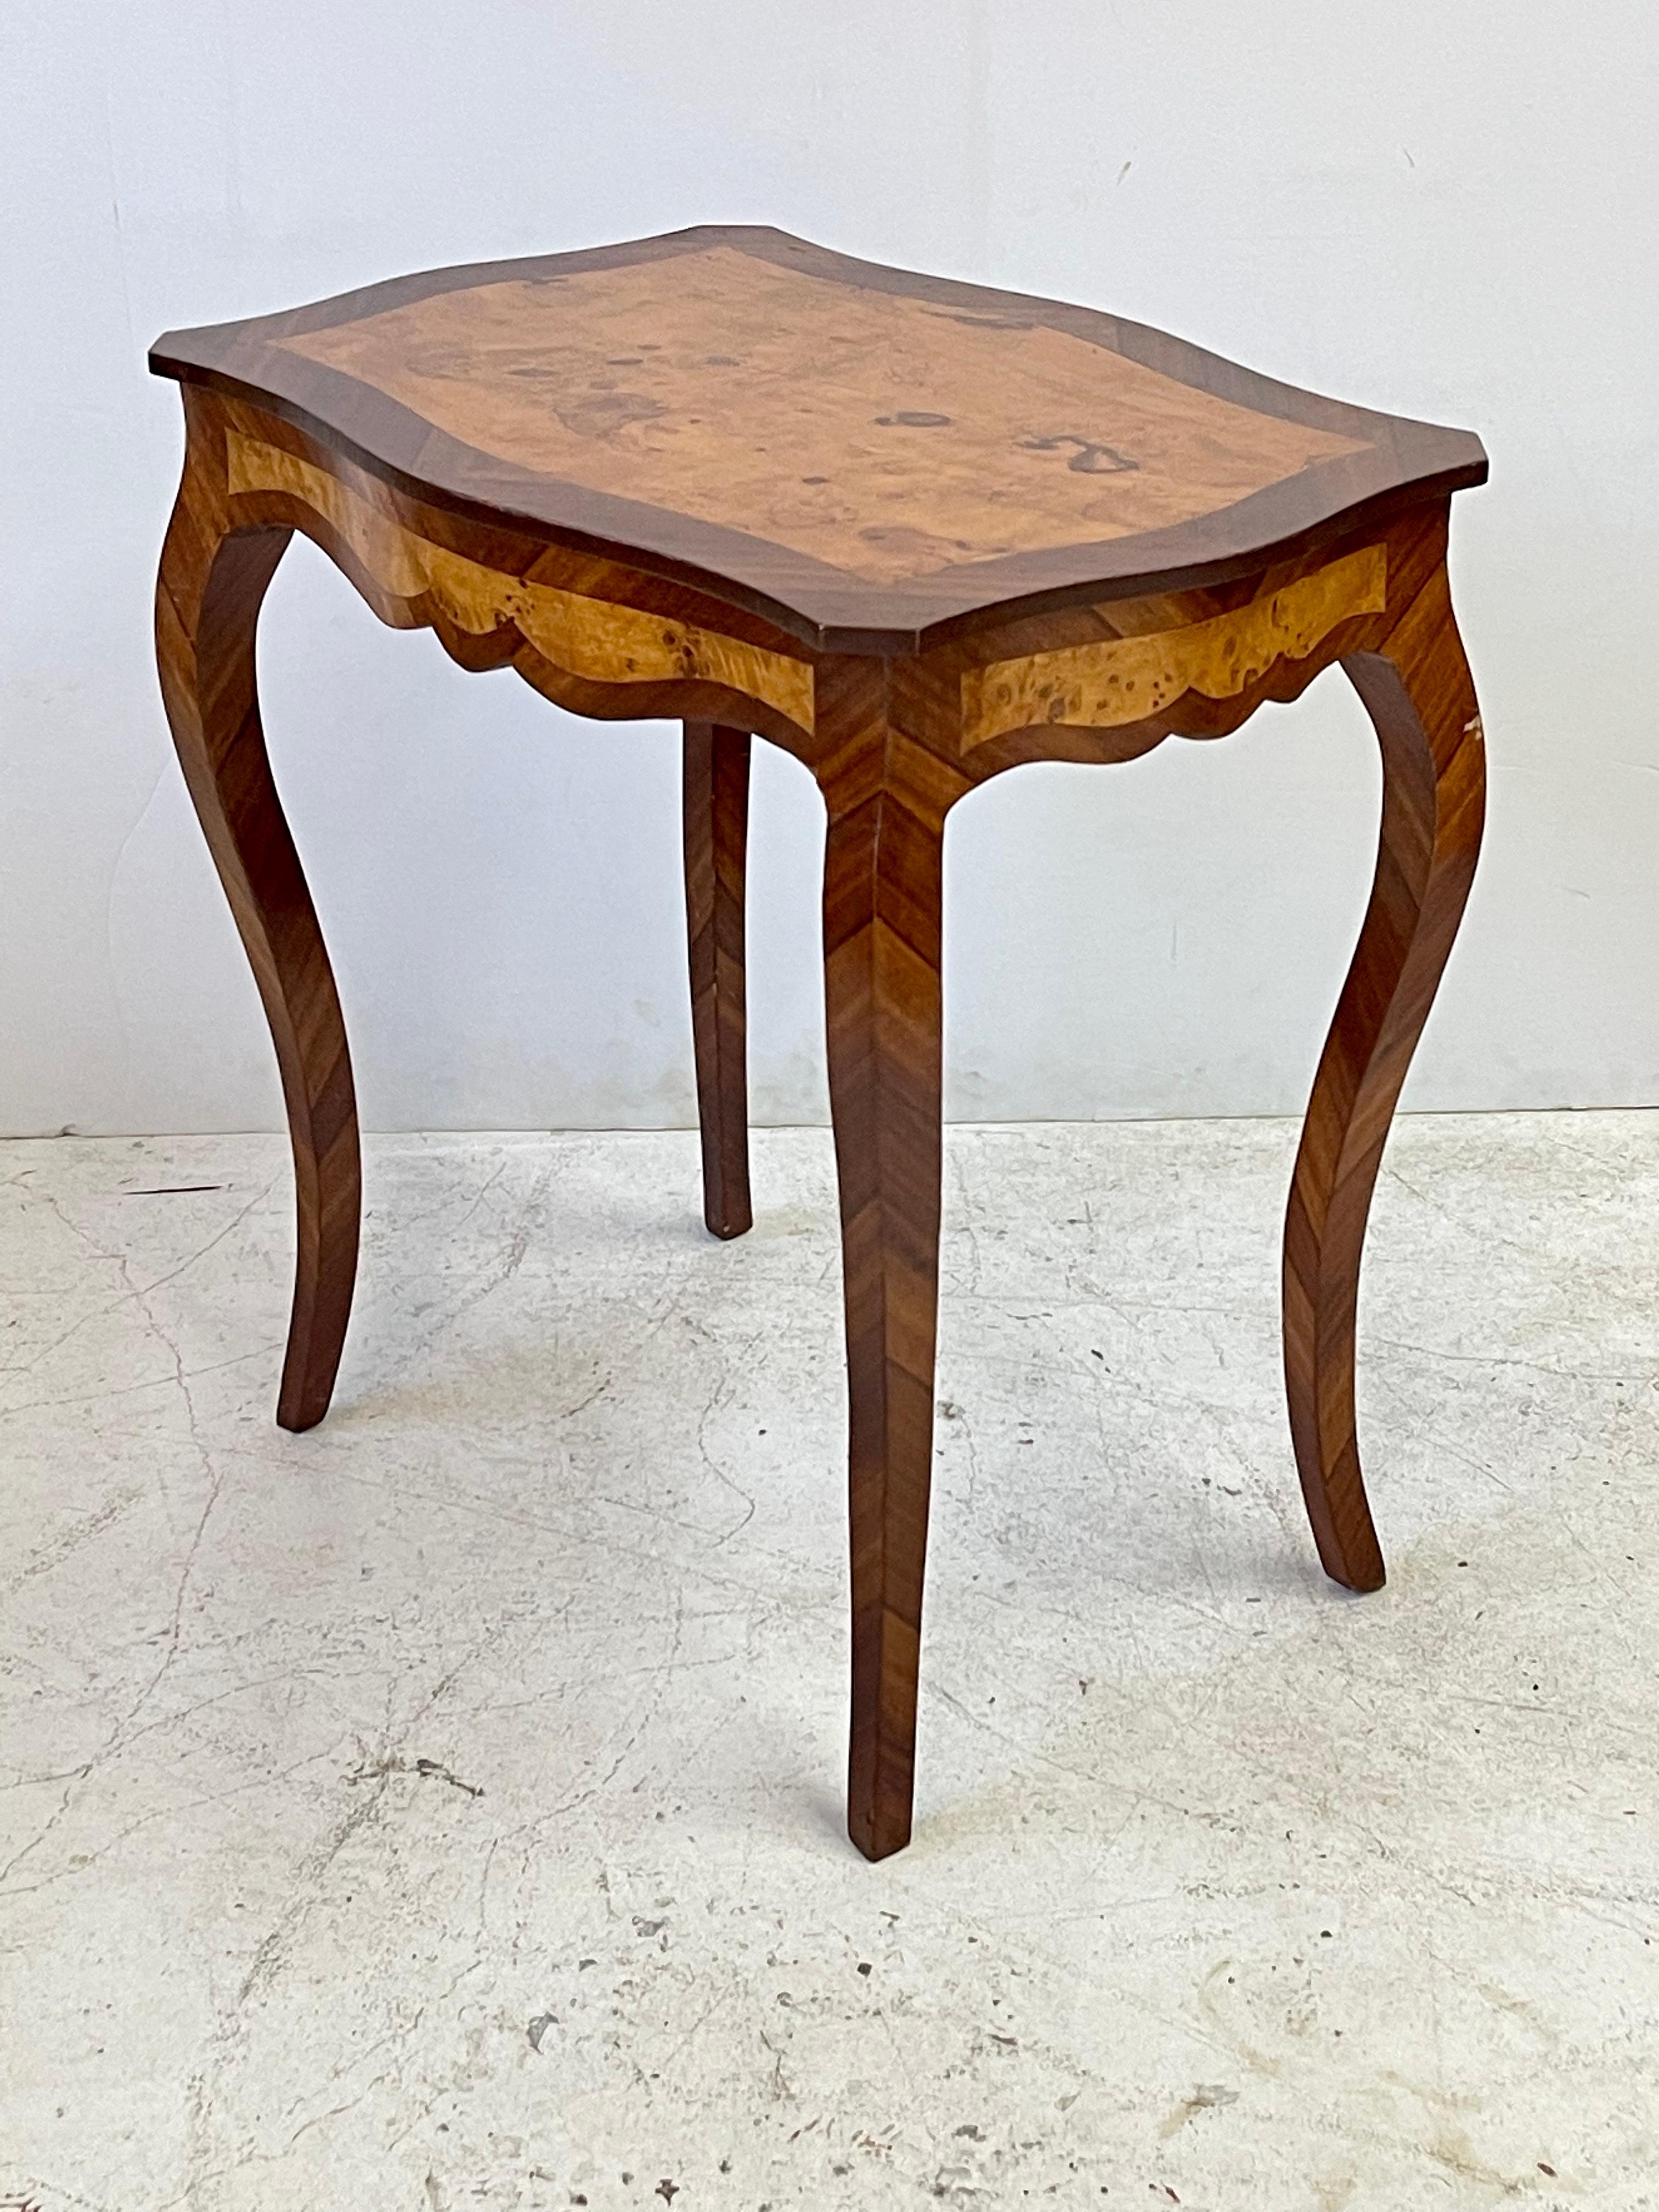 20th Century Italian side table beautifully made of burlwood and rosewood veneers in the style of Louis XV. The symmetrical rectangular table has a shaped top with canted corners over a serpentine frieze with scalloped apron on all sides. The table